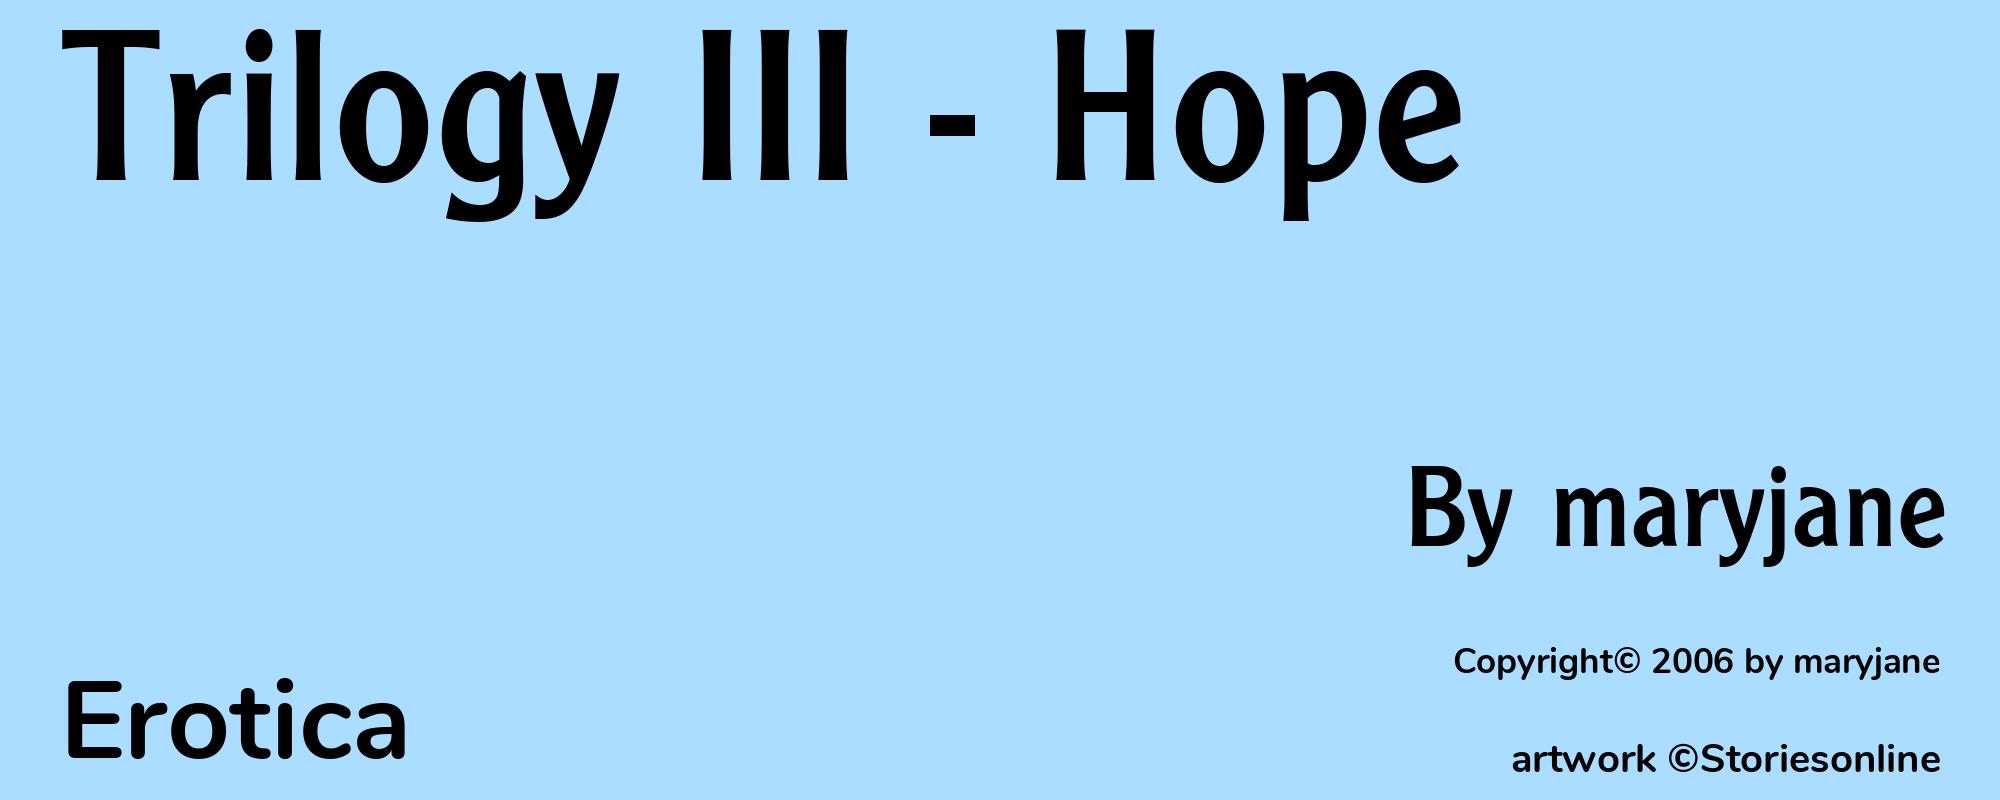 Trilogy III - Hope - Cover